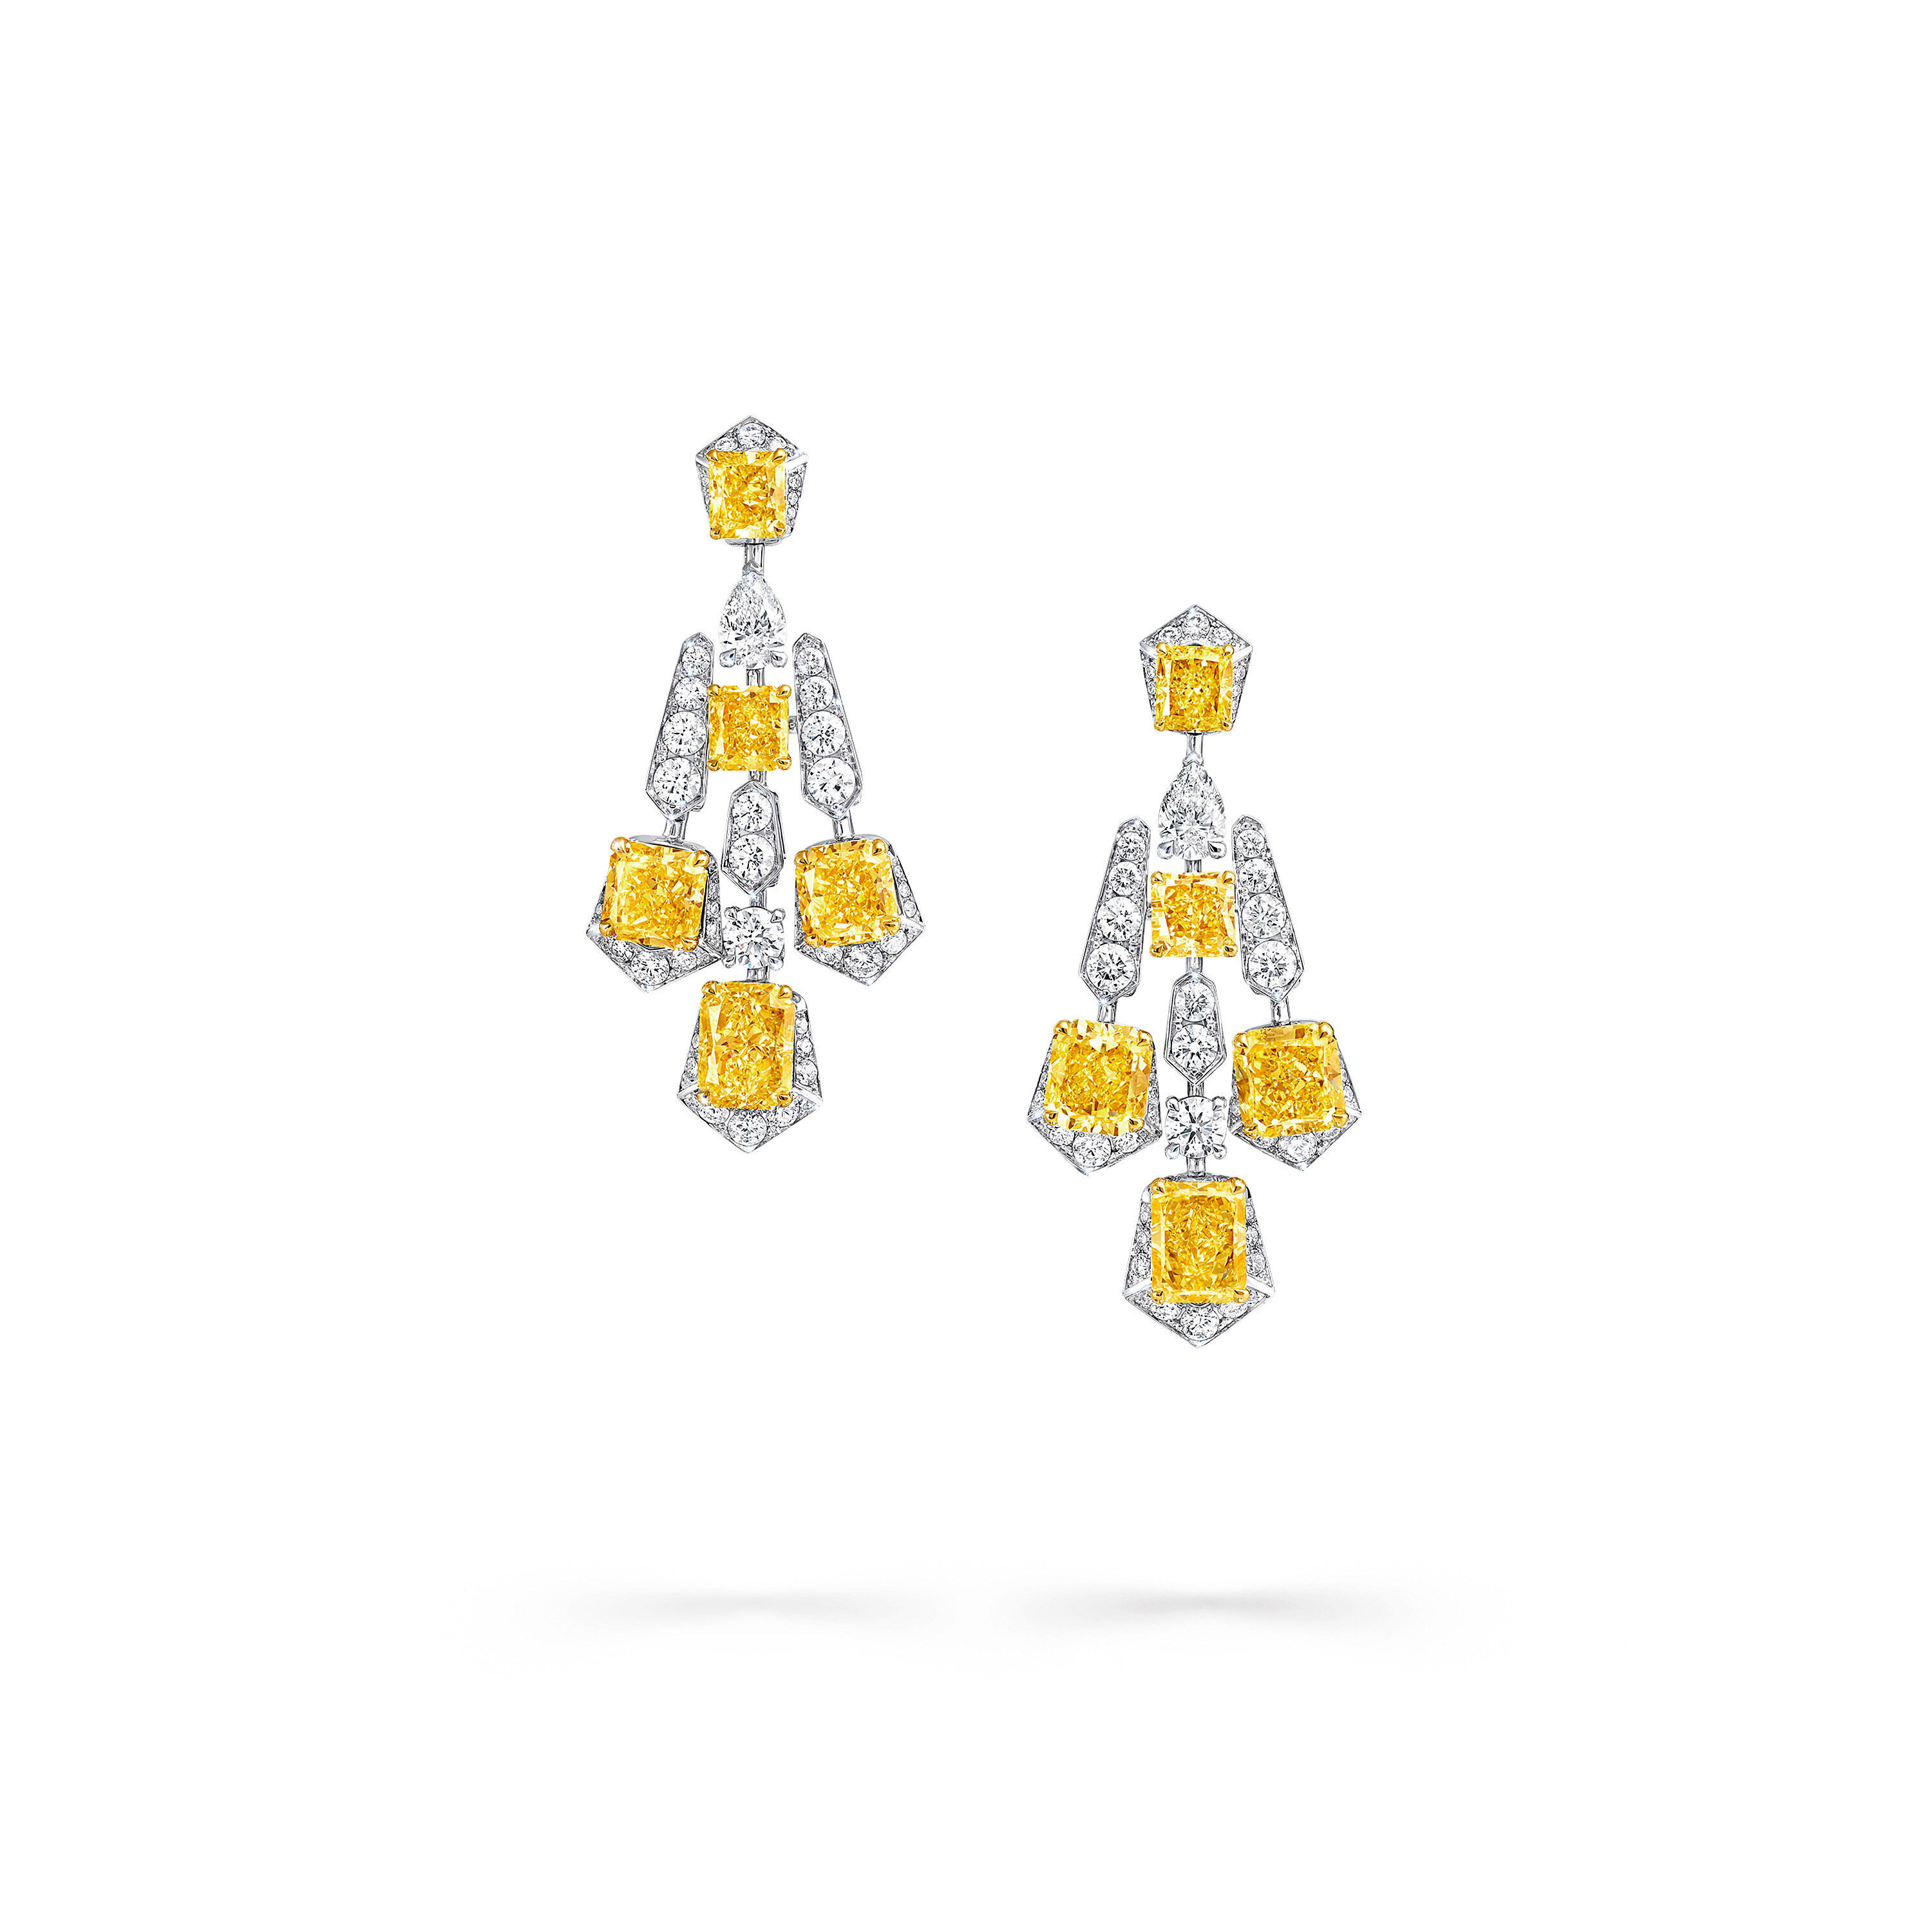 Yellow and white diamond high jewellery Night Moon earrings from the Graff Tribal collection